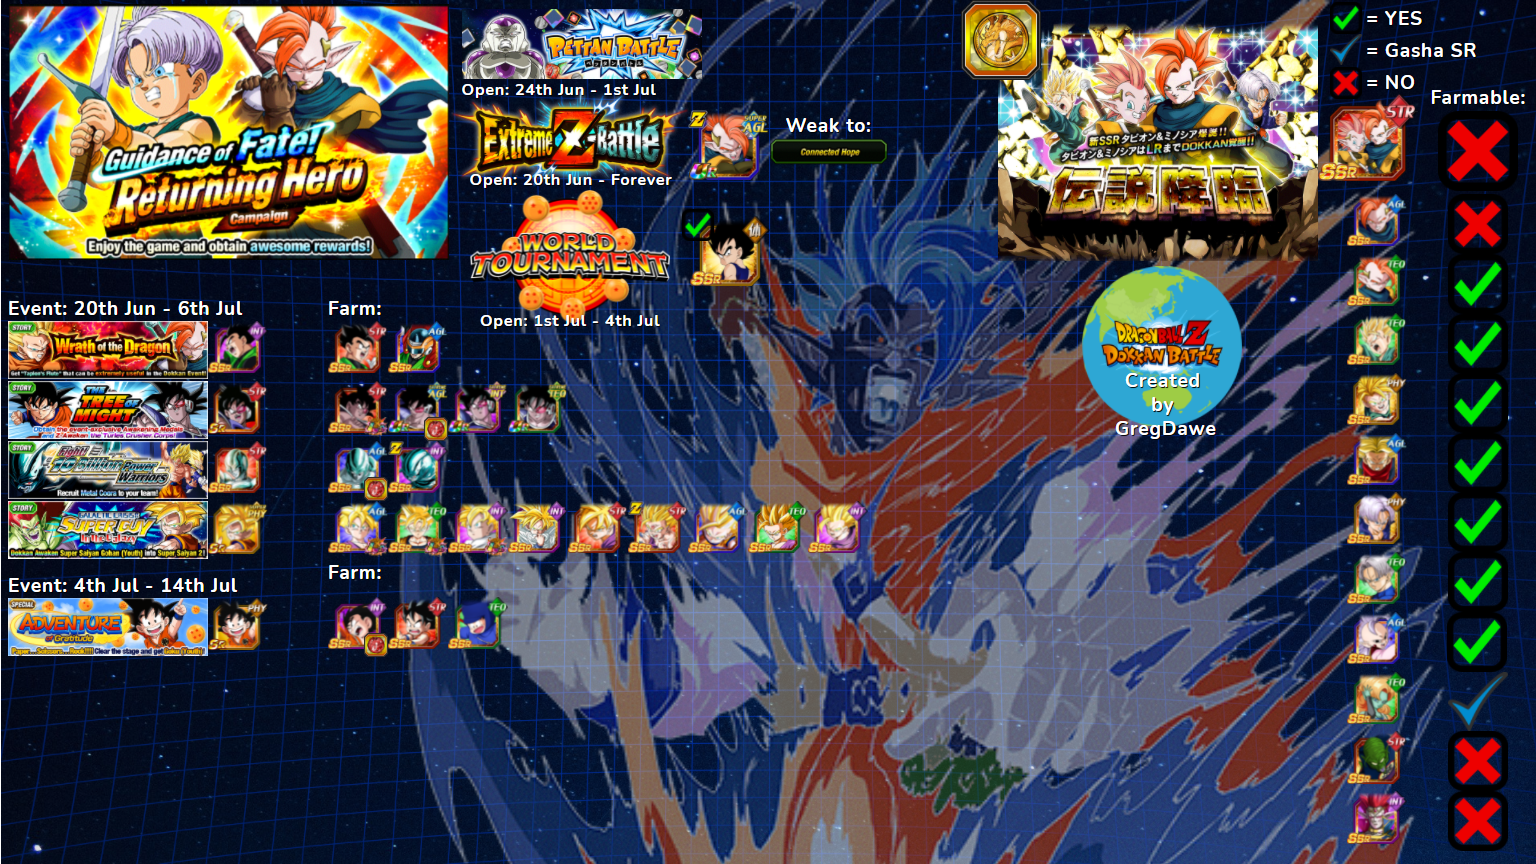 A Visual Guide to Farming SA during the LR Tapion Campaign